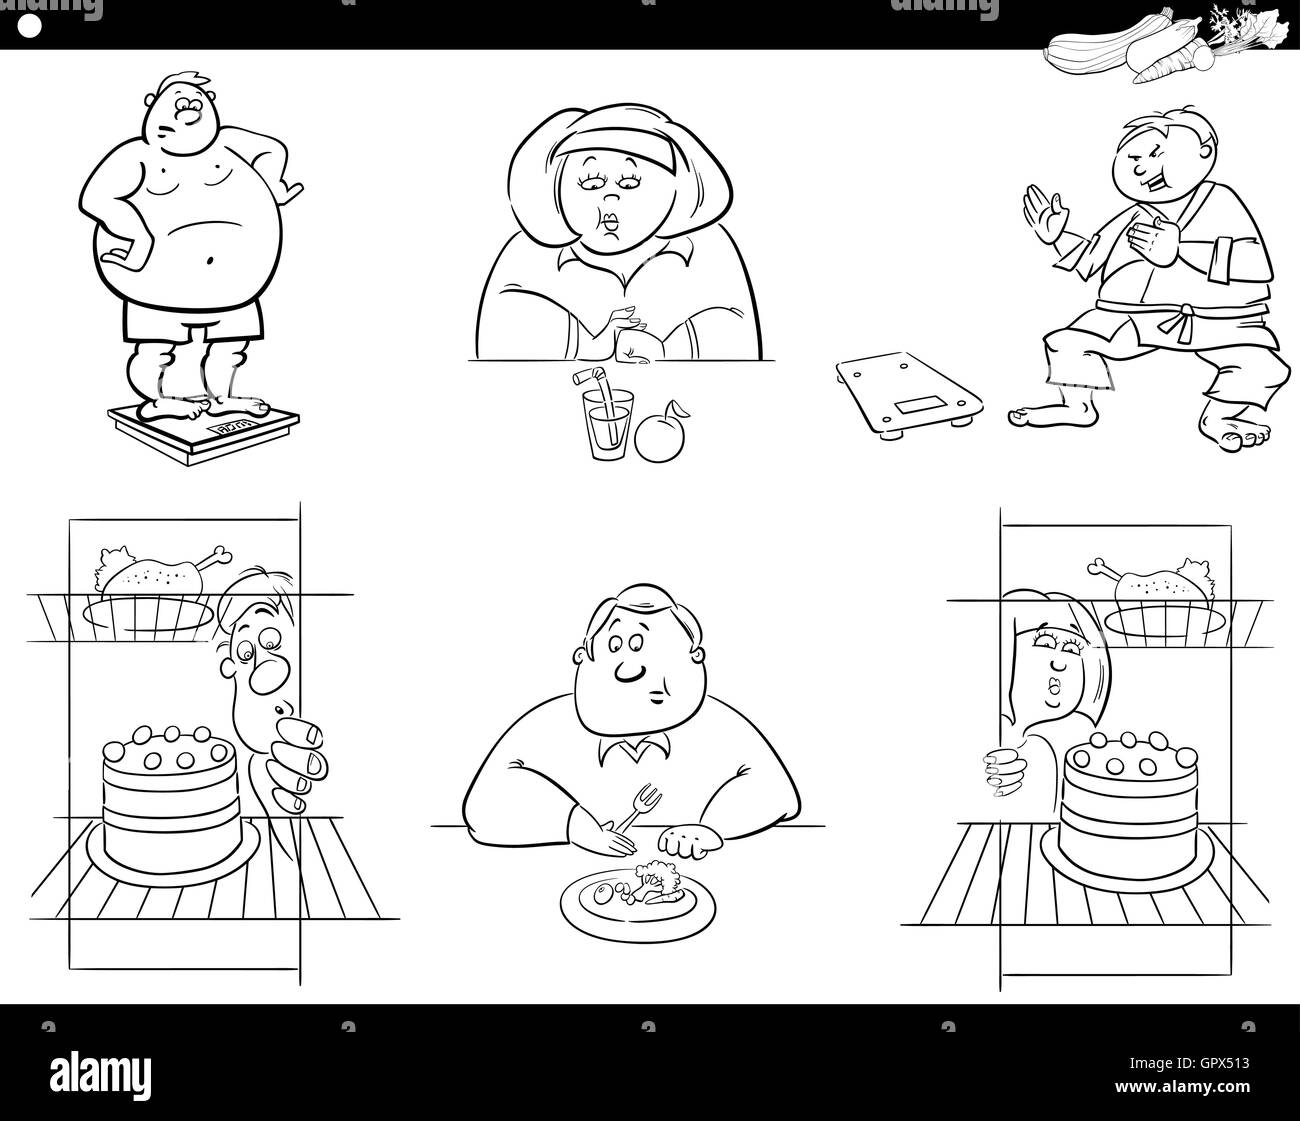 Black and White Cartoon Humorous Illustration of Overweight People Characters on Diet Stock Vector